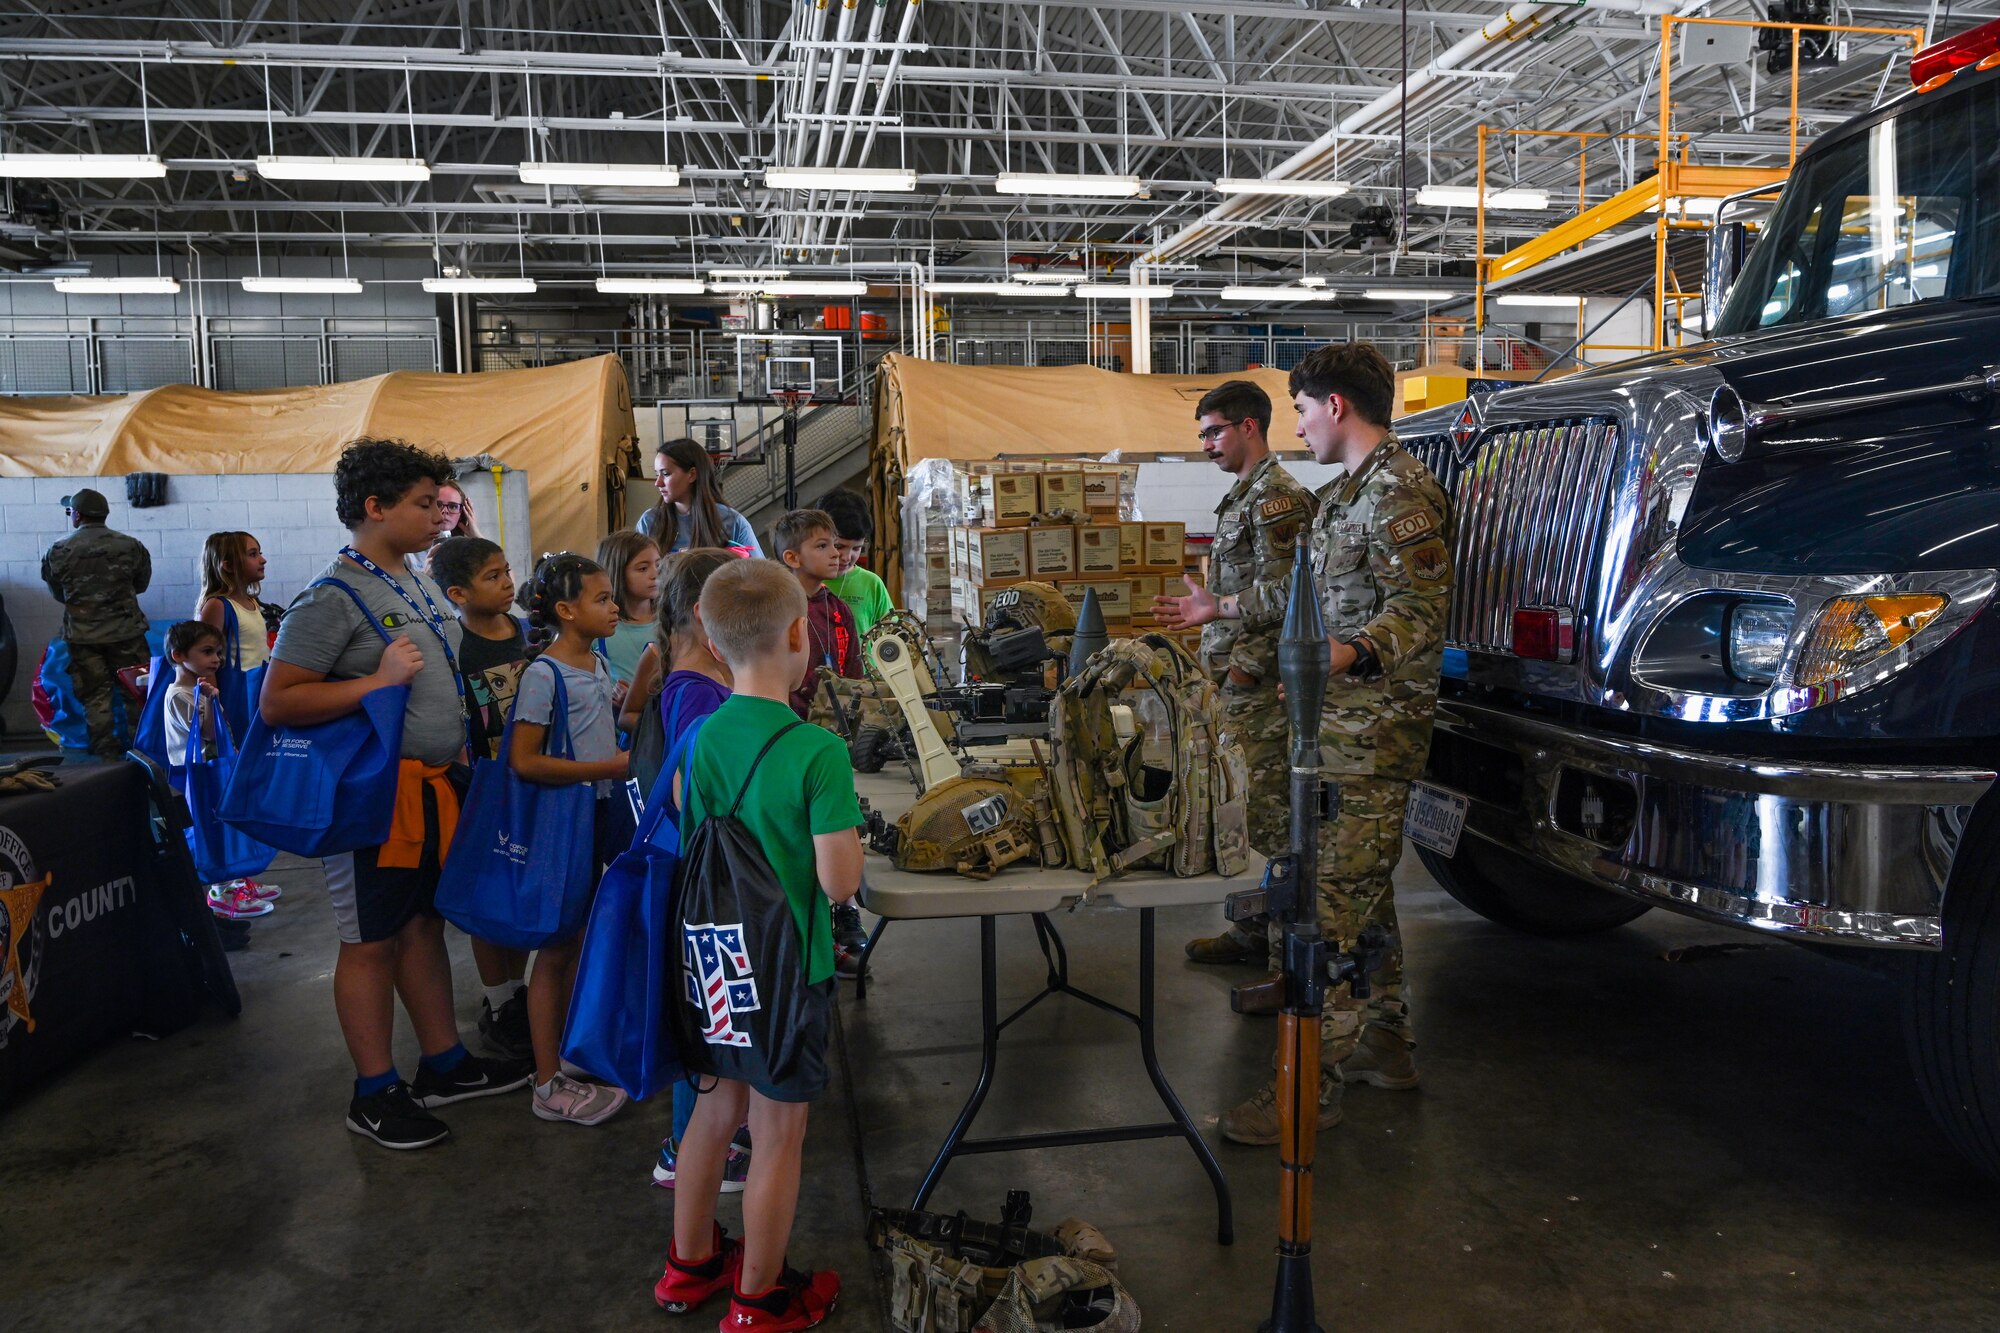 The event allowed military children to participate in a mock deployment and experience what their parents do while preparing for real-world deployments. (U.S. Air Force photo by Senior Airman Kylie Barrow)